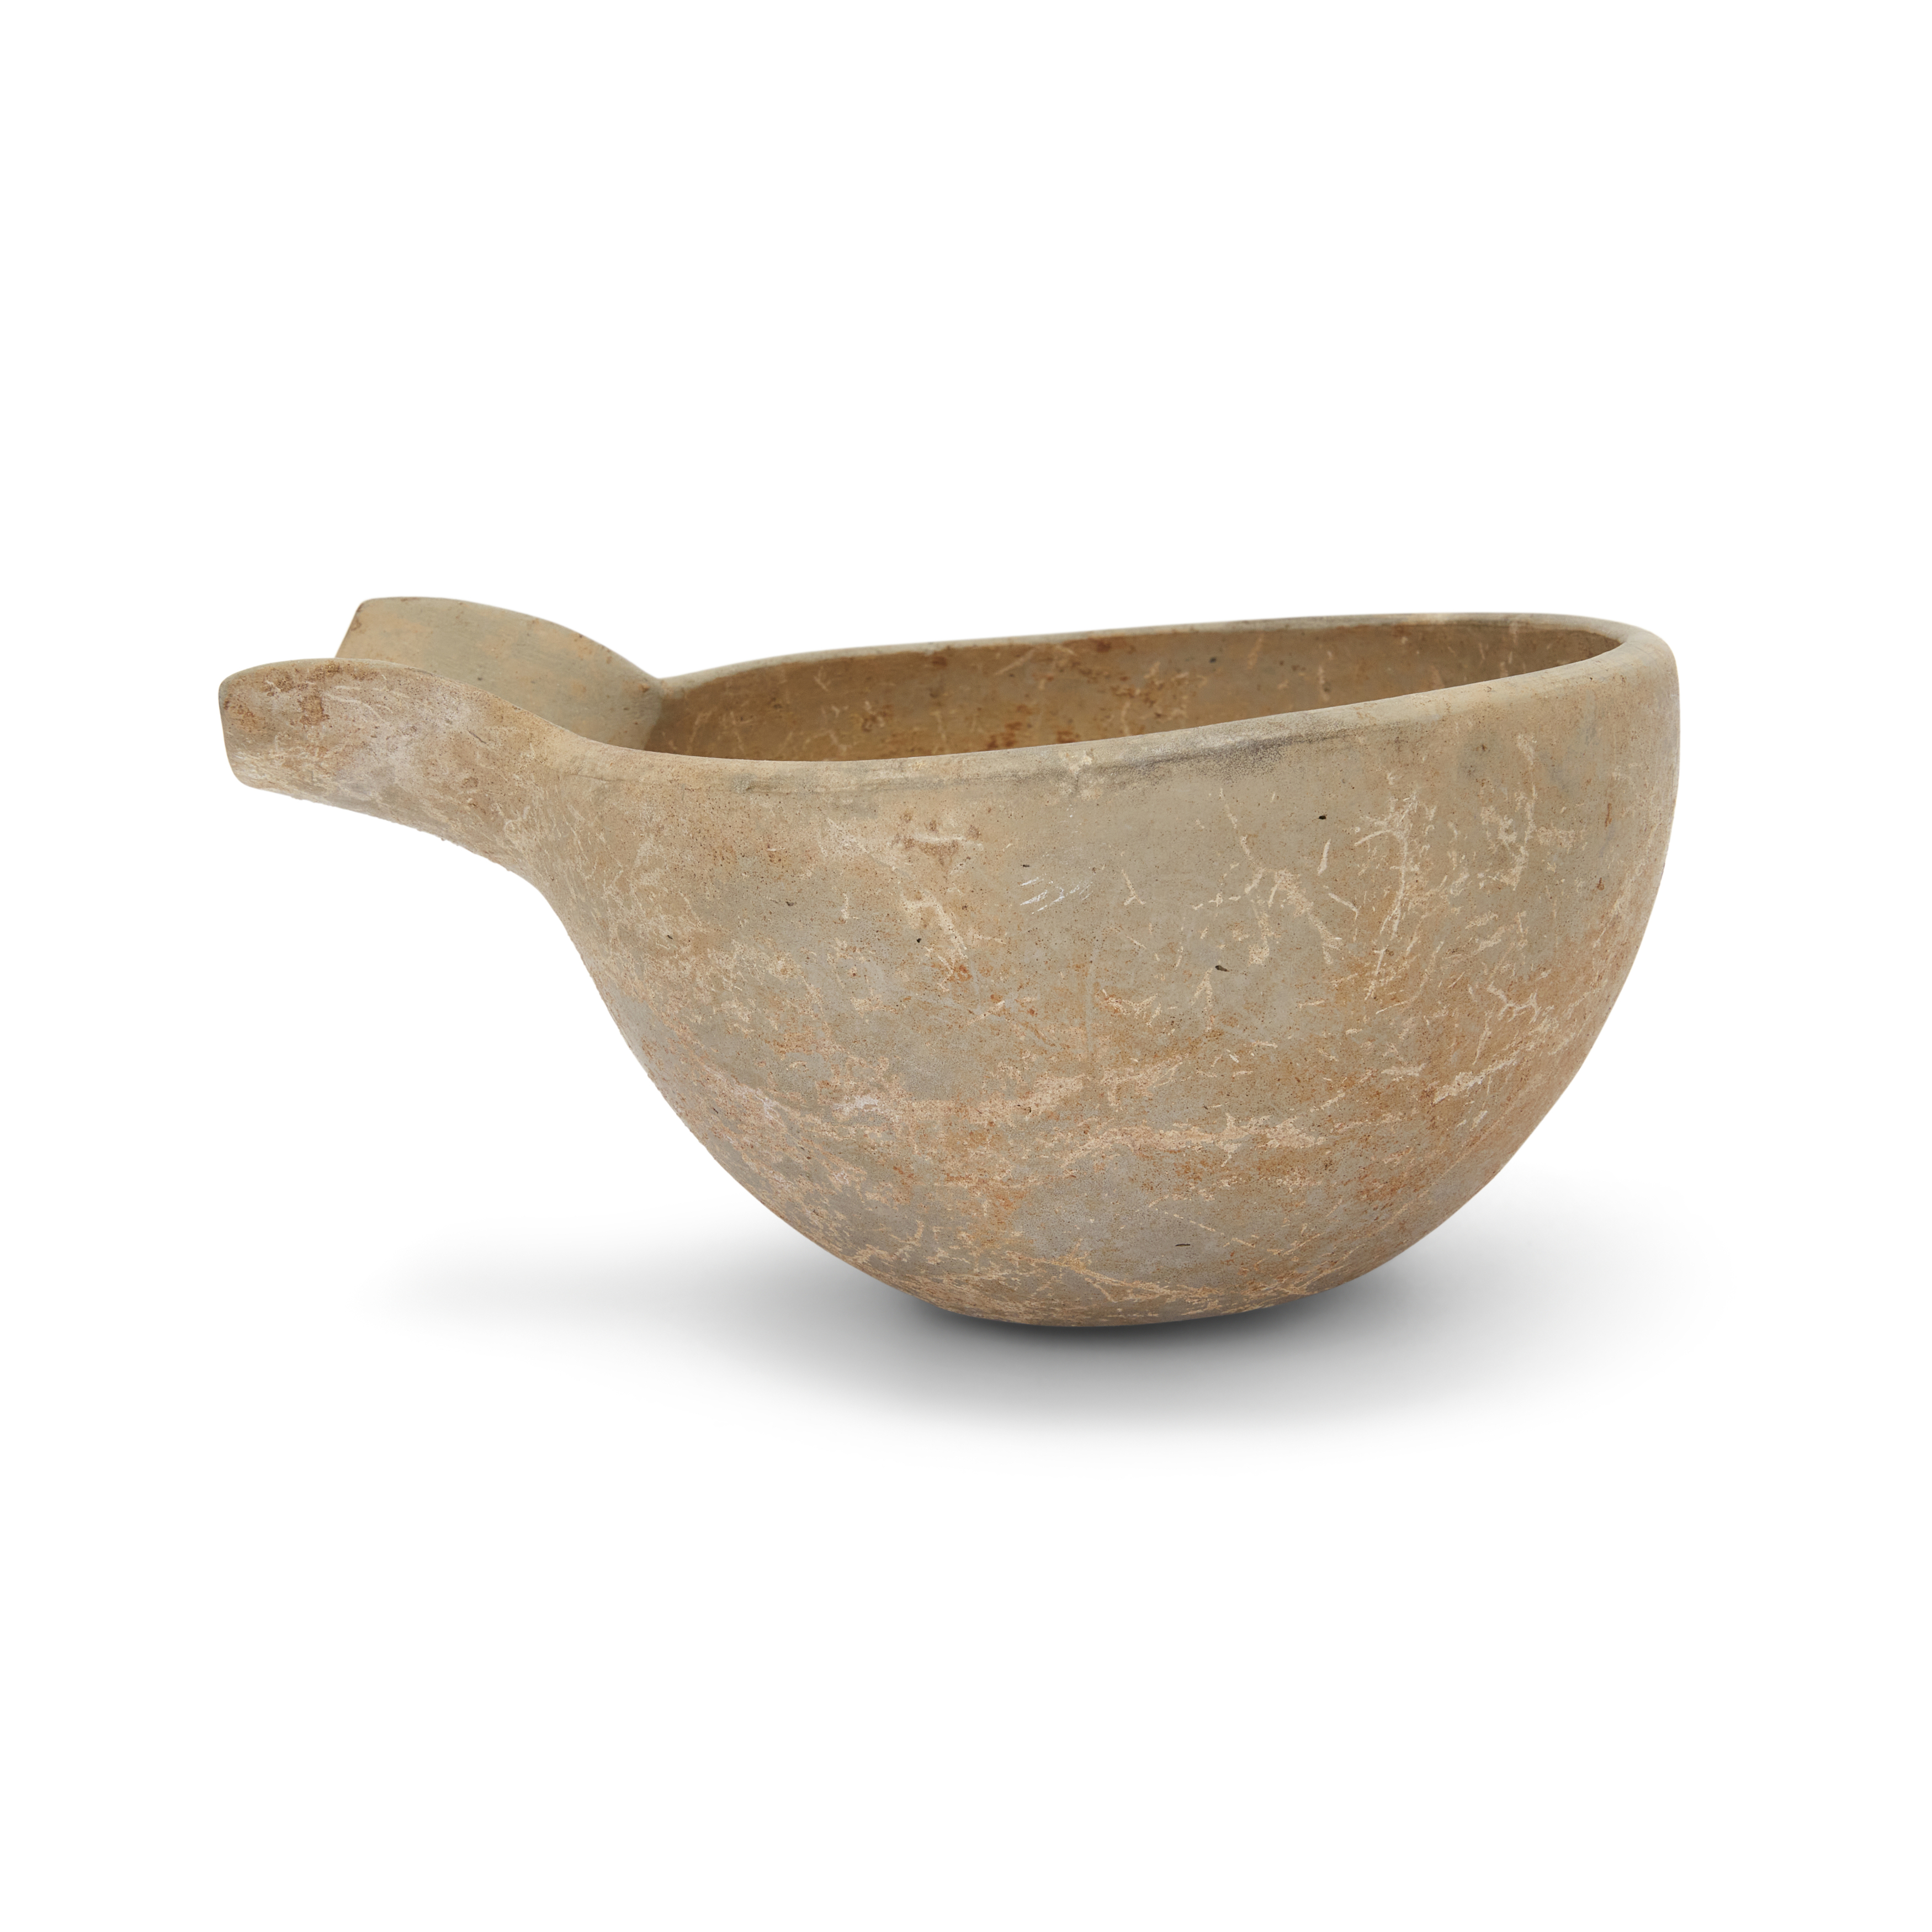 An intact North Iranian grey pottery hemispherical trough-spouted bowl, early 1st Millennium B.C... - Image 2 of 2